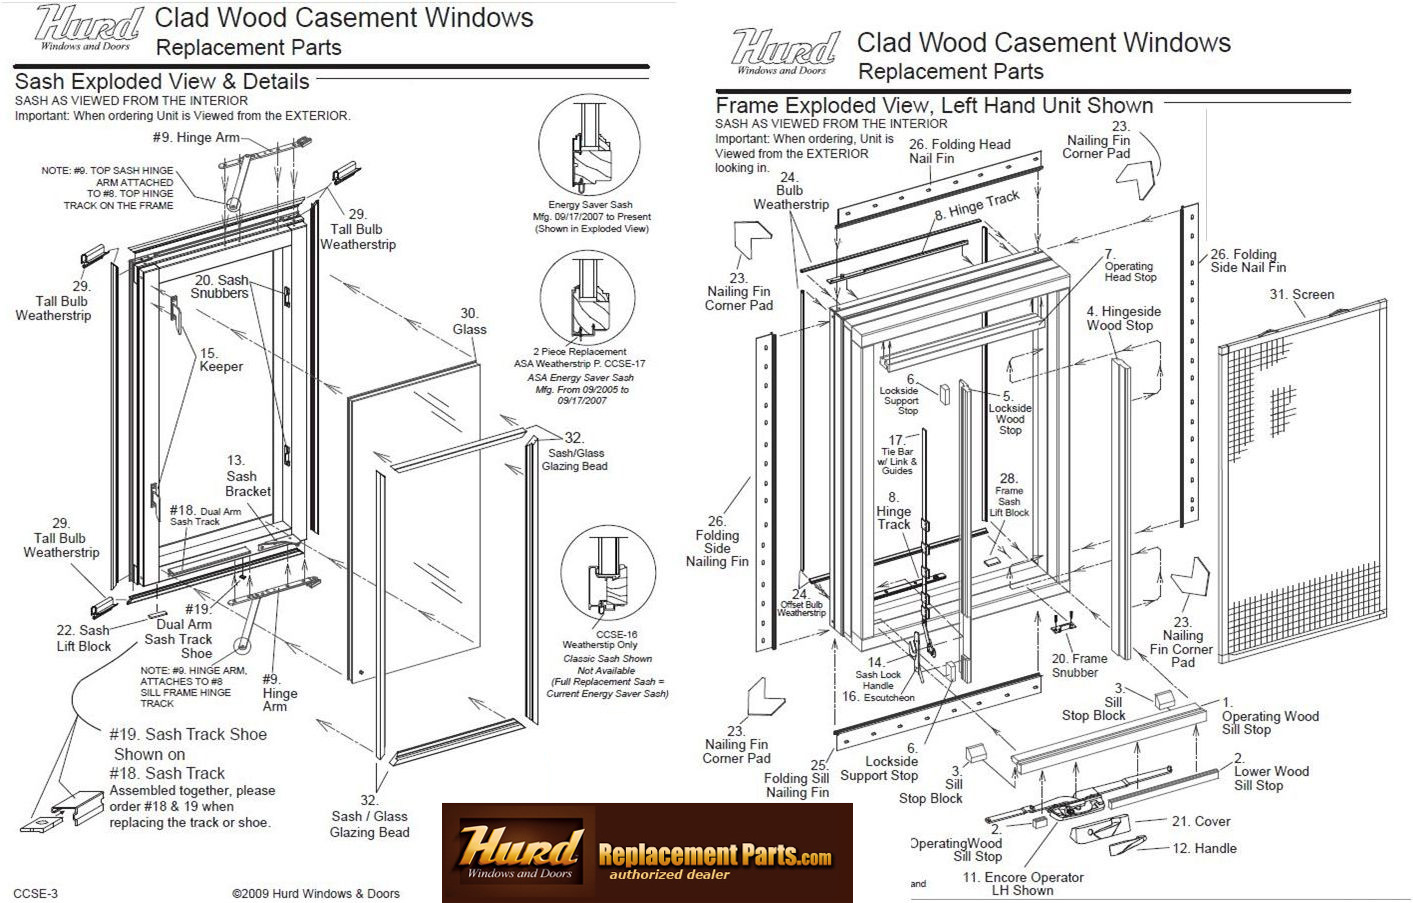 Gorell window replacement parts